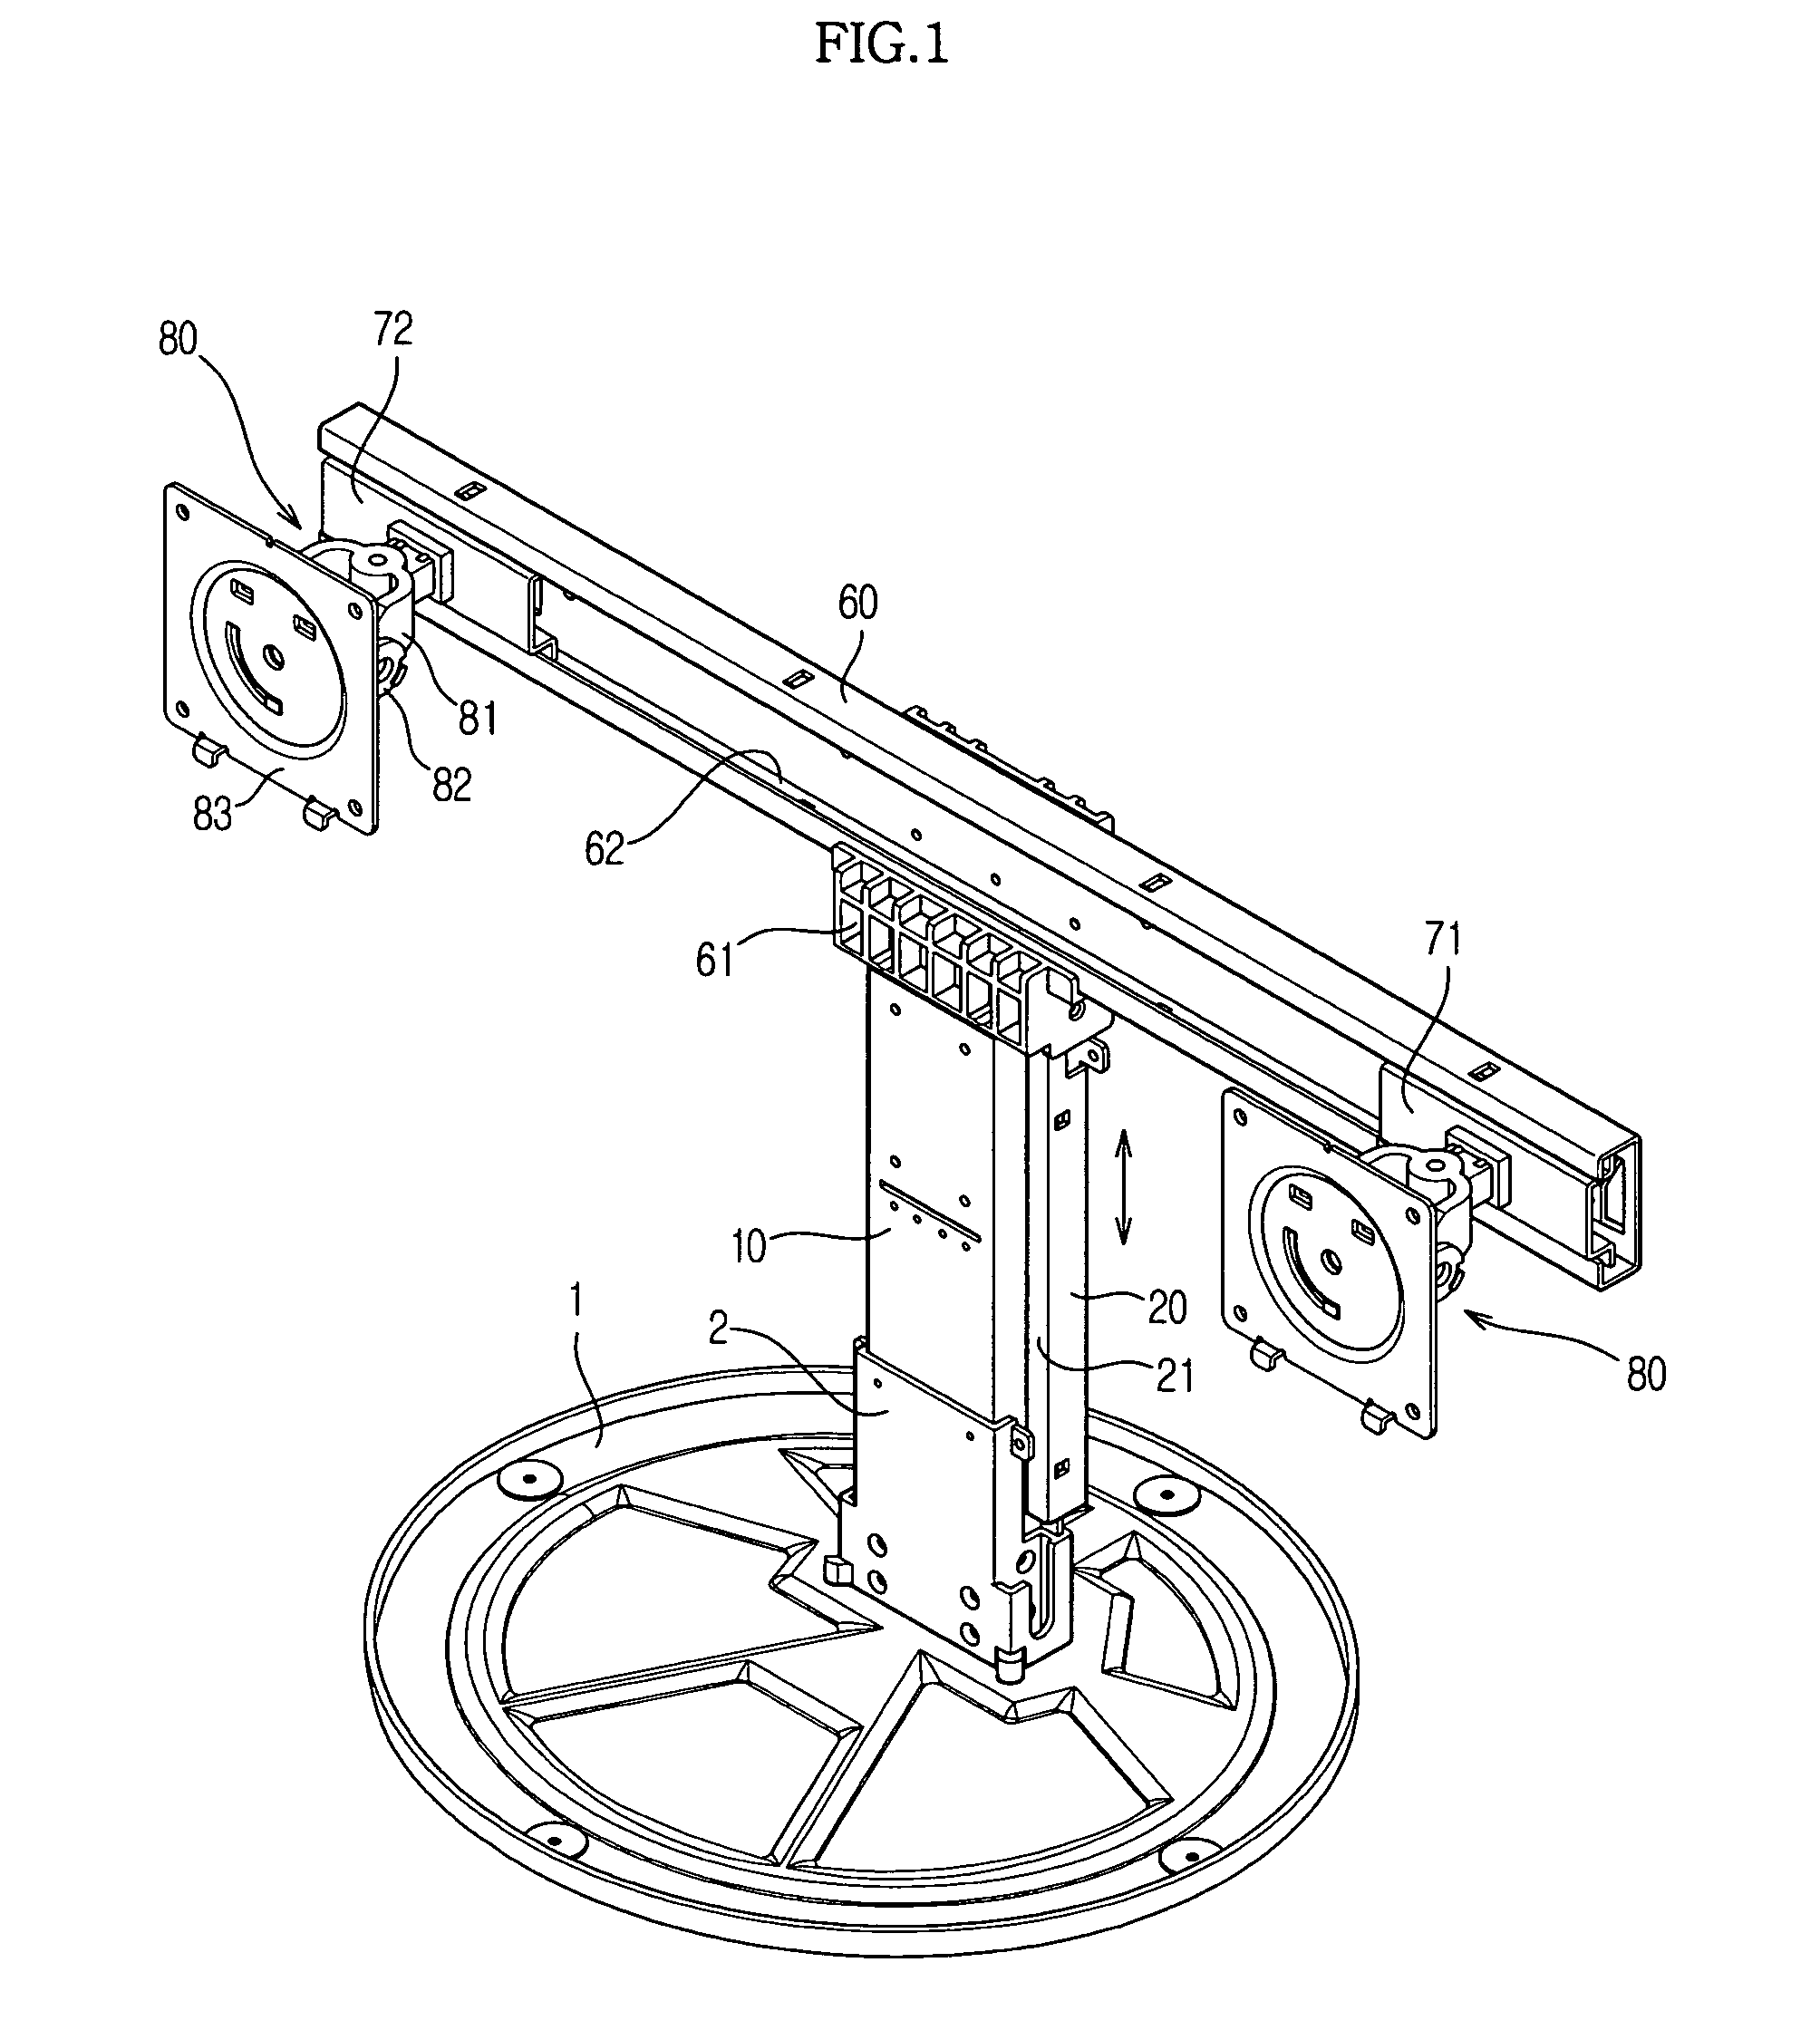 Supporting device for display units